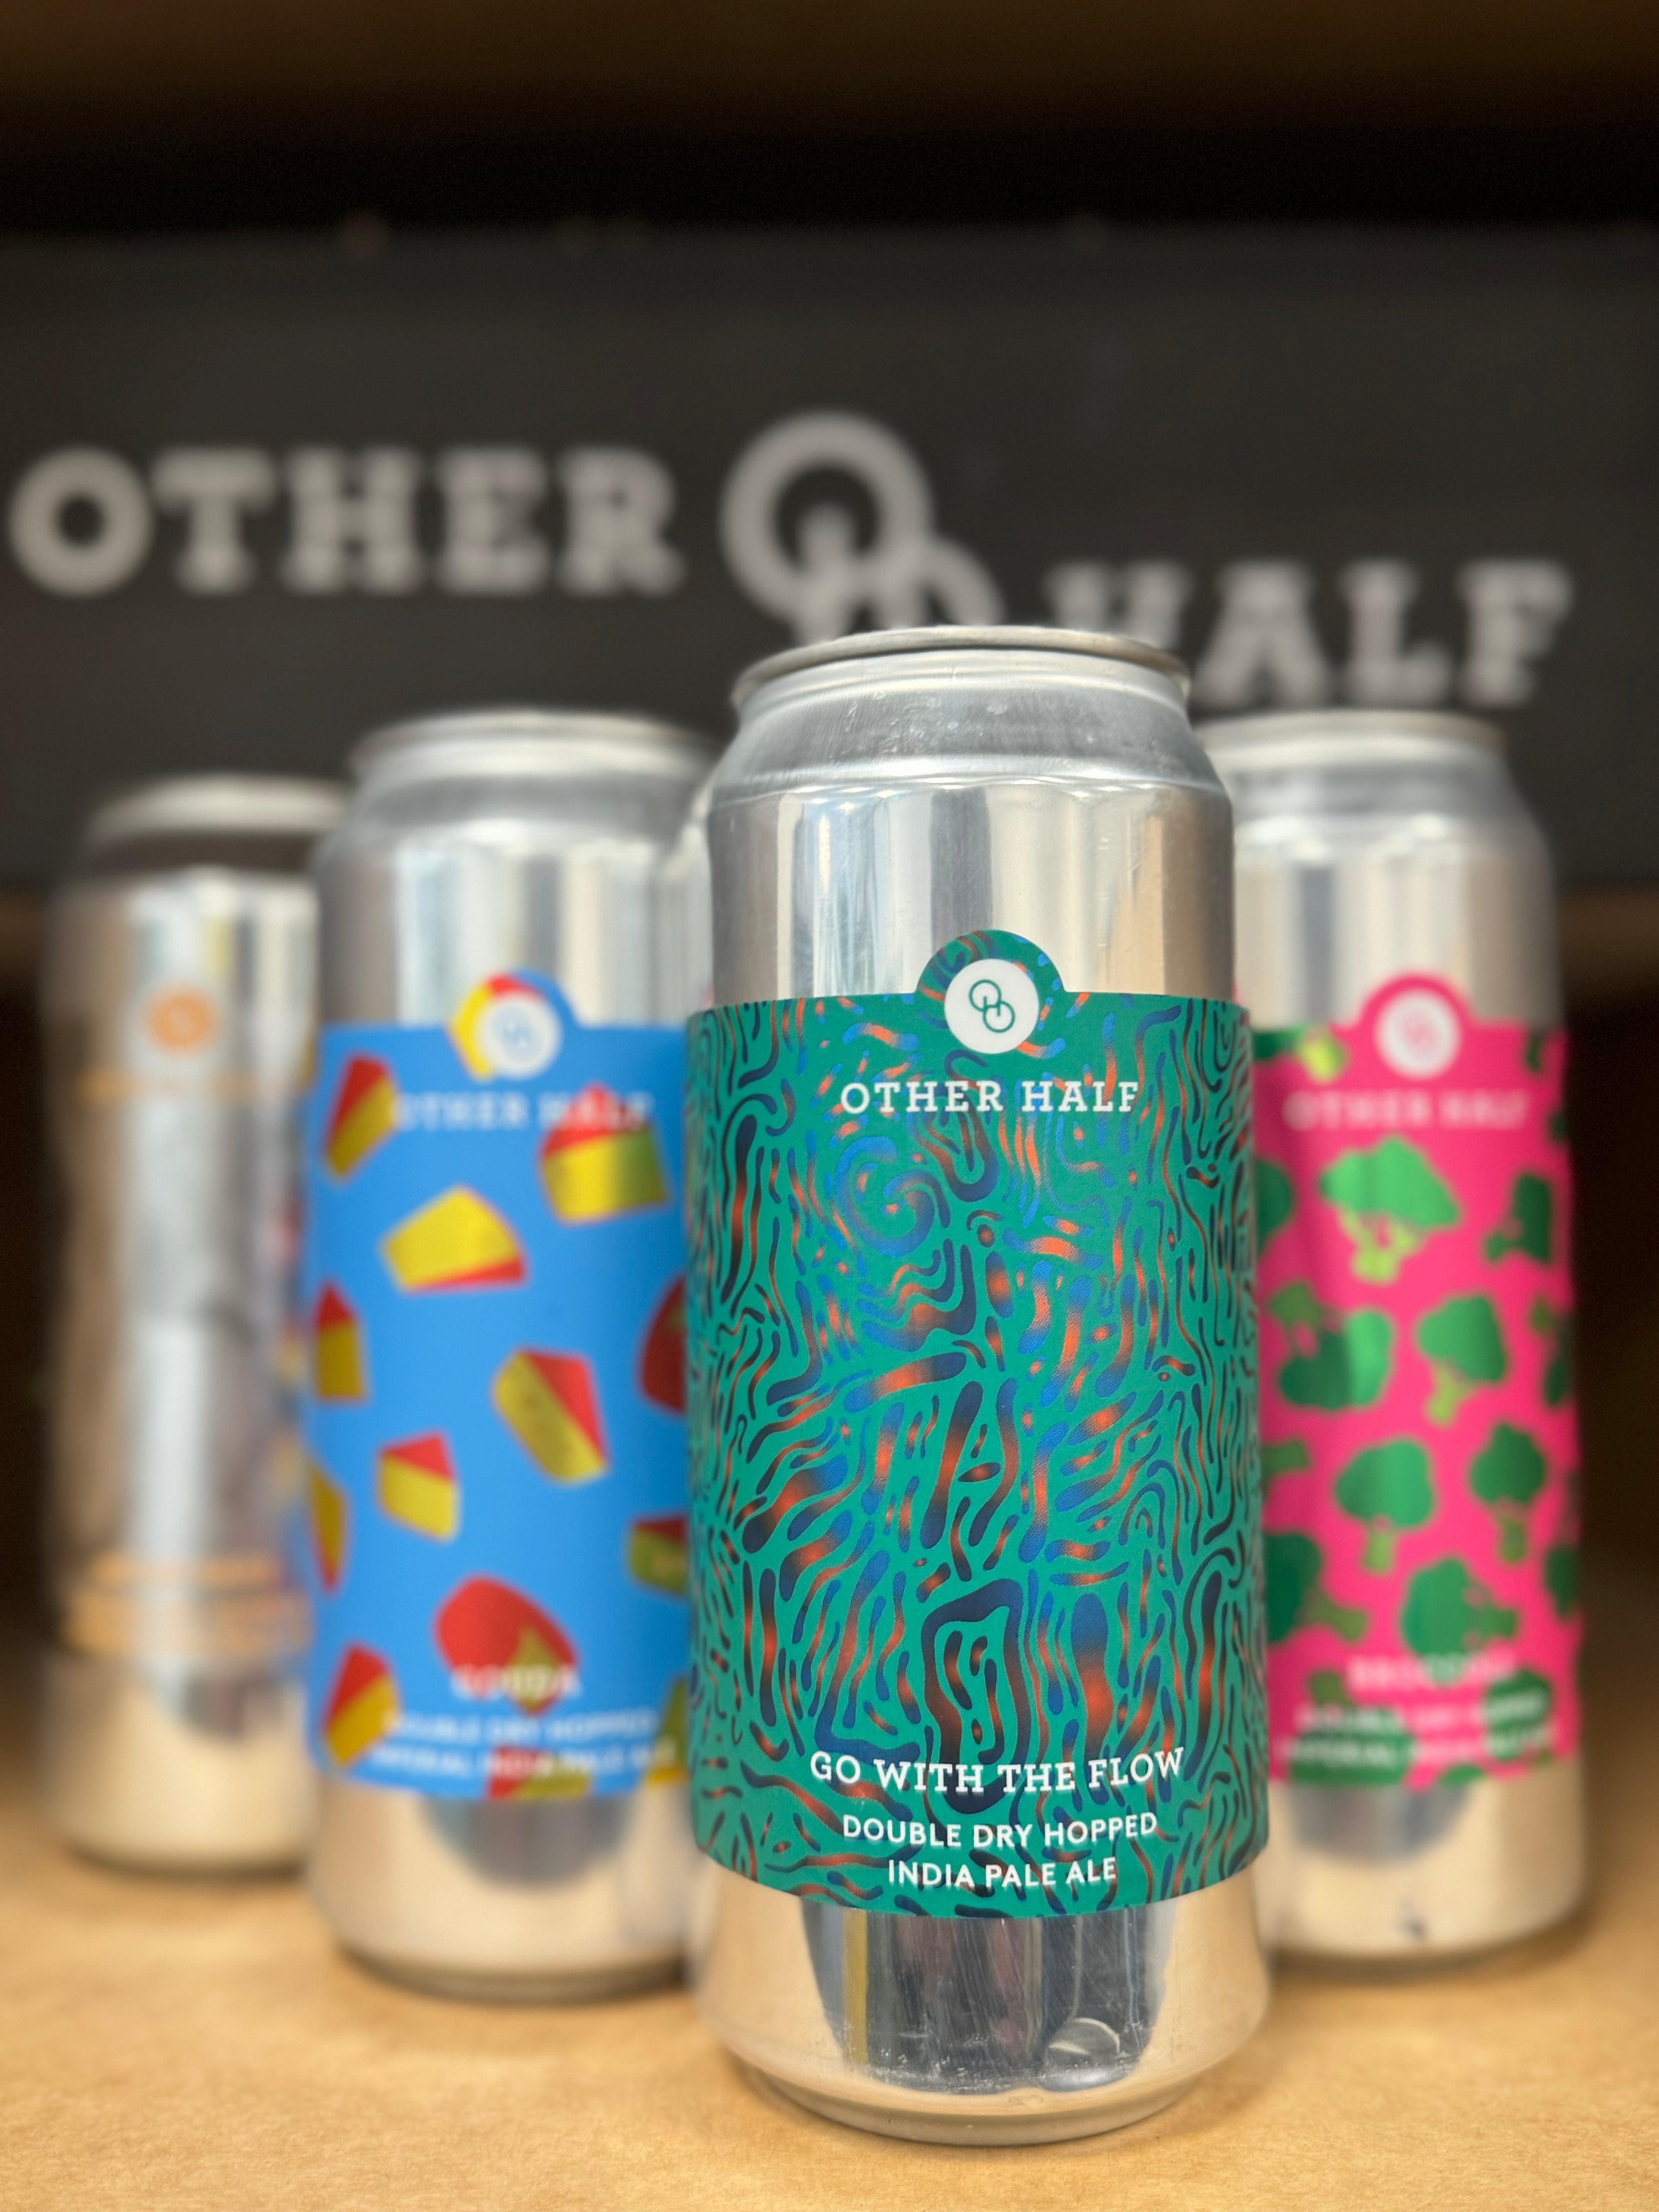 -Other Half- Other Half 🚀 Take Off Set 6-Packs & Cases- Only @ Beer Republic - The best online beer store for American & Canadian craft beer - Buy beer online from the USA and Canada - Bier online kopen - Amerikaans bier kopen - Craft beer store - Craft beer kopen - Amerikanisch bier kaufen - Bier online kaufen - Acheter biere online - IPA - Stout - Porter - New England IPA - Hazy IPA - Imperial Stout - Barrel Aged - Barrel Aged Imperial Stout - Brown - Dark beer - Blond - Blonde - Pilsner - Lager - Wheat -